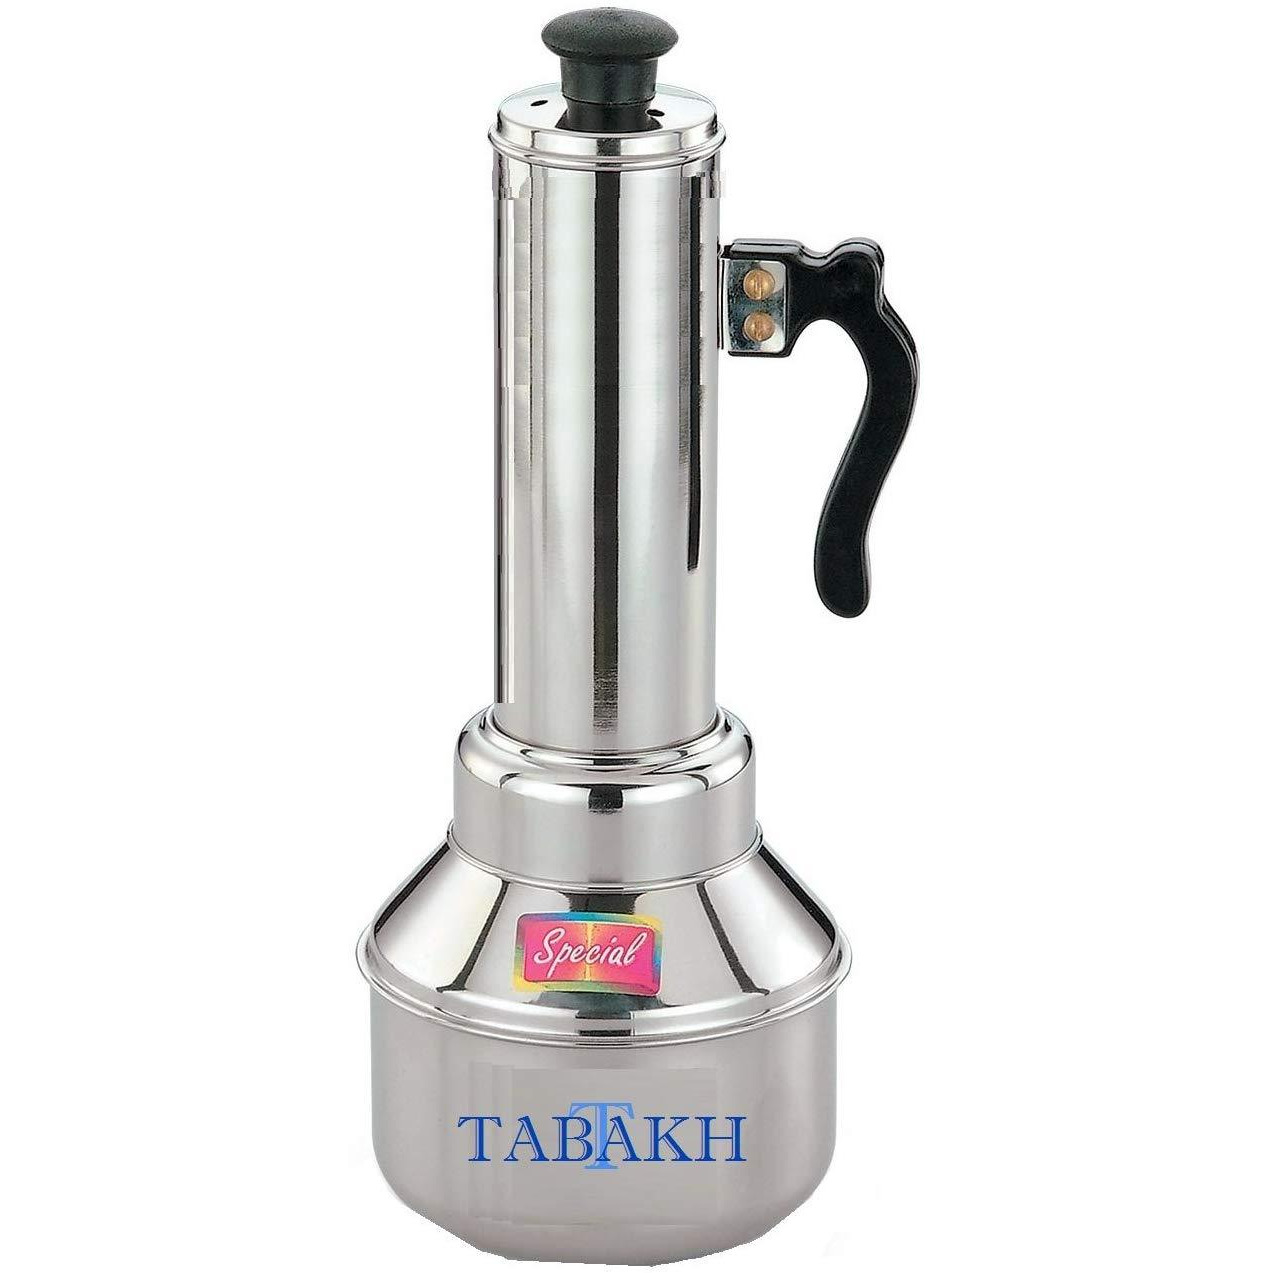 Tabakh Stainless Steel Micro Puttu Maker Cooker